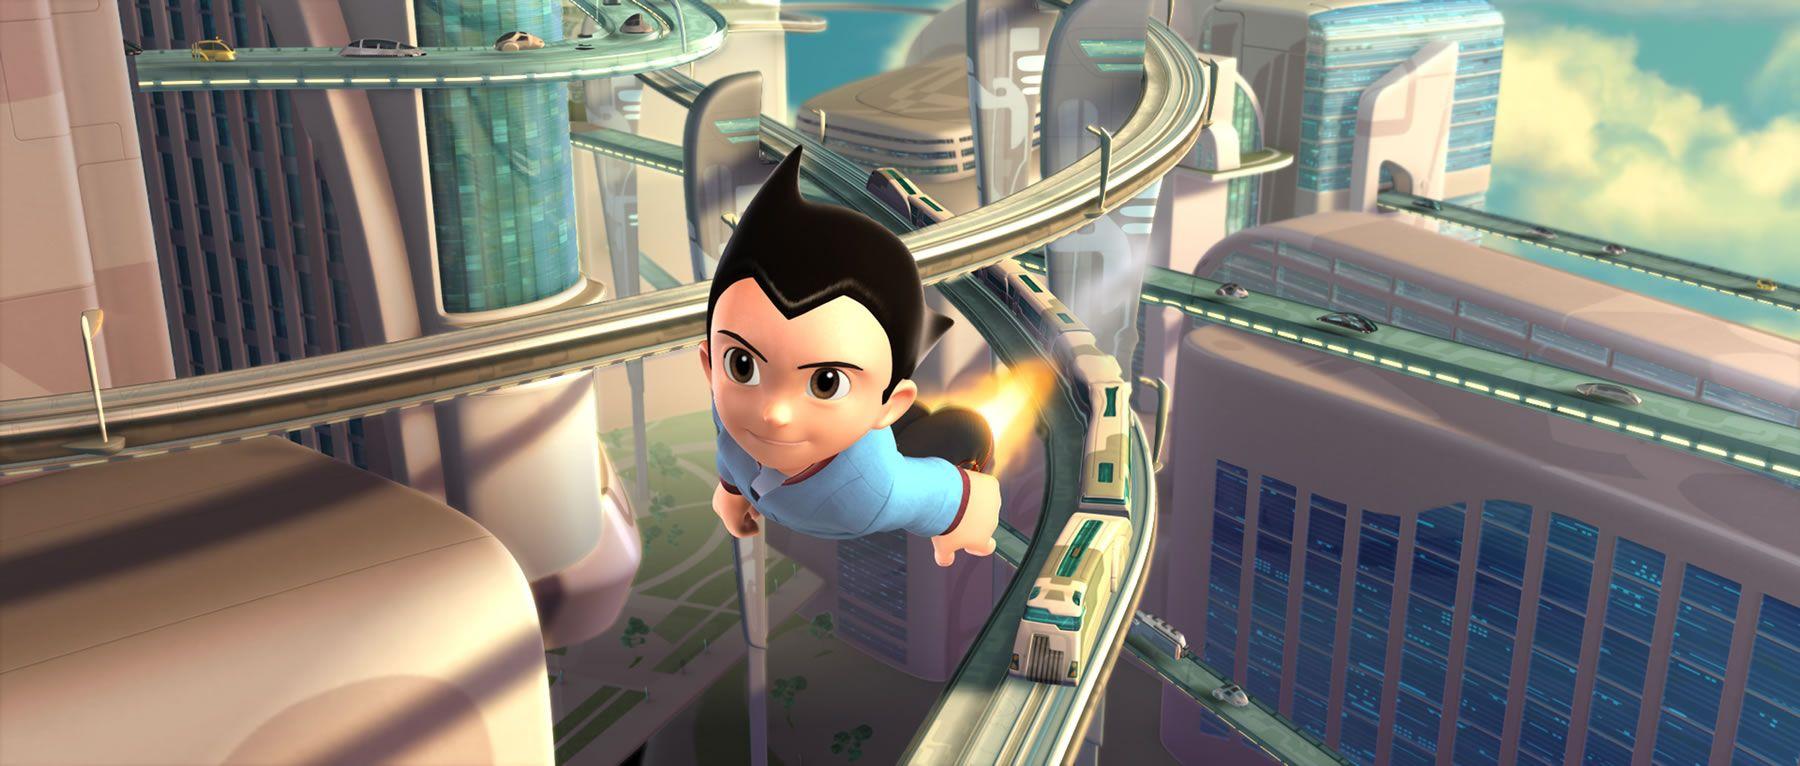 Astro Boy Widescreen Wallpaper for Android